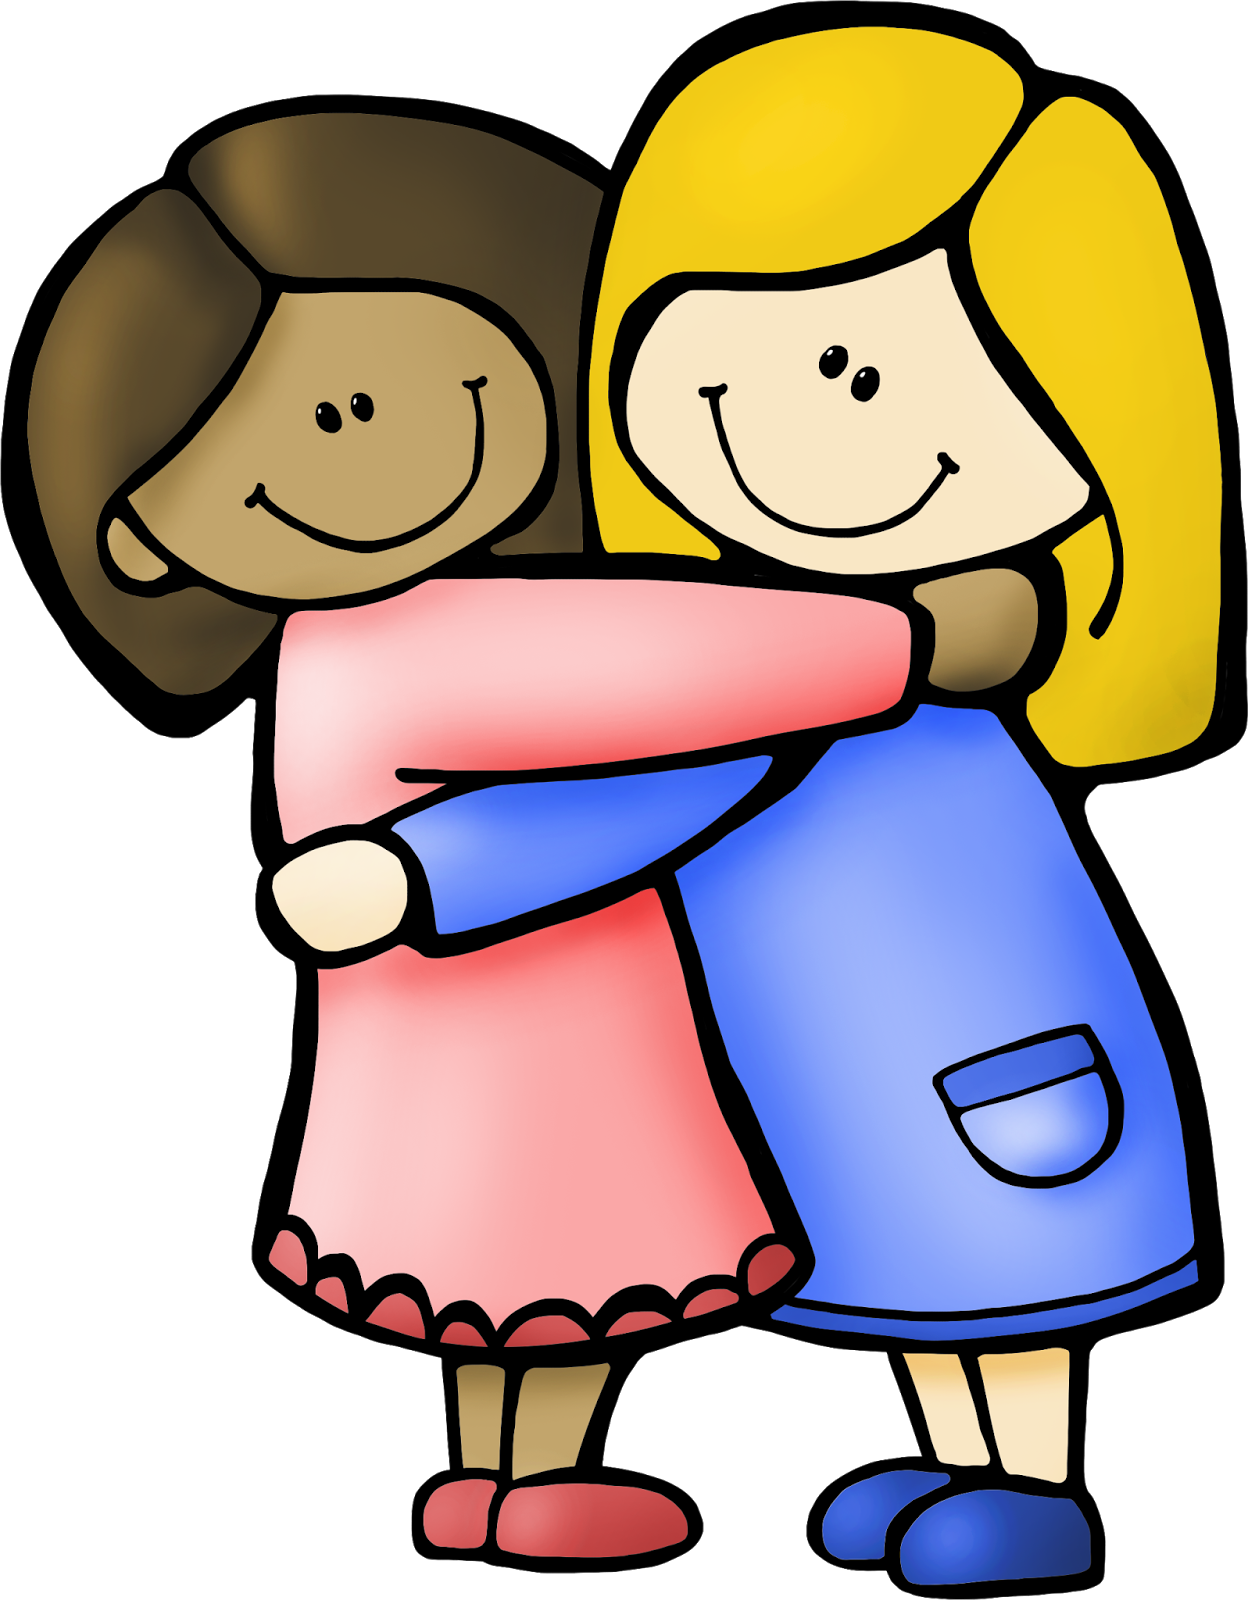 Whimsy workshop teaching communication. Clipart people friend